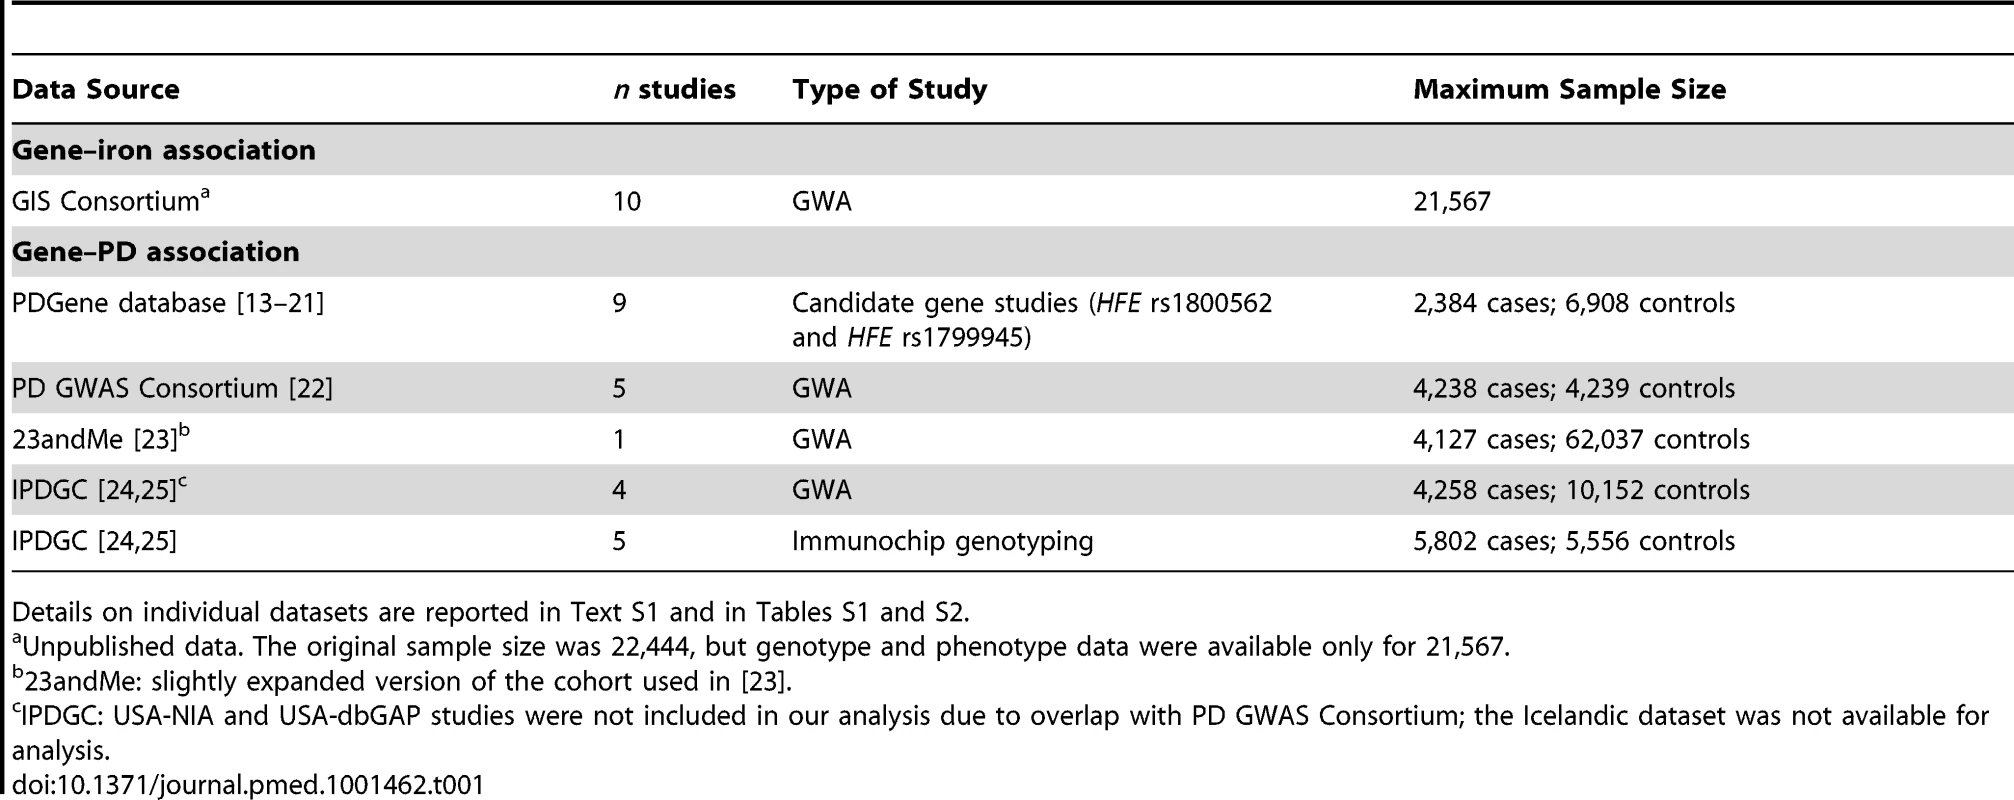 Characteristics of the studies included for the gene–iron and gene–PD associations.